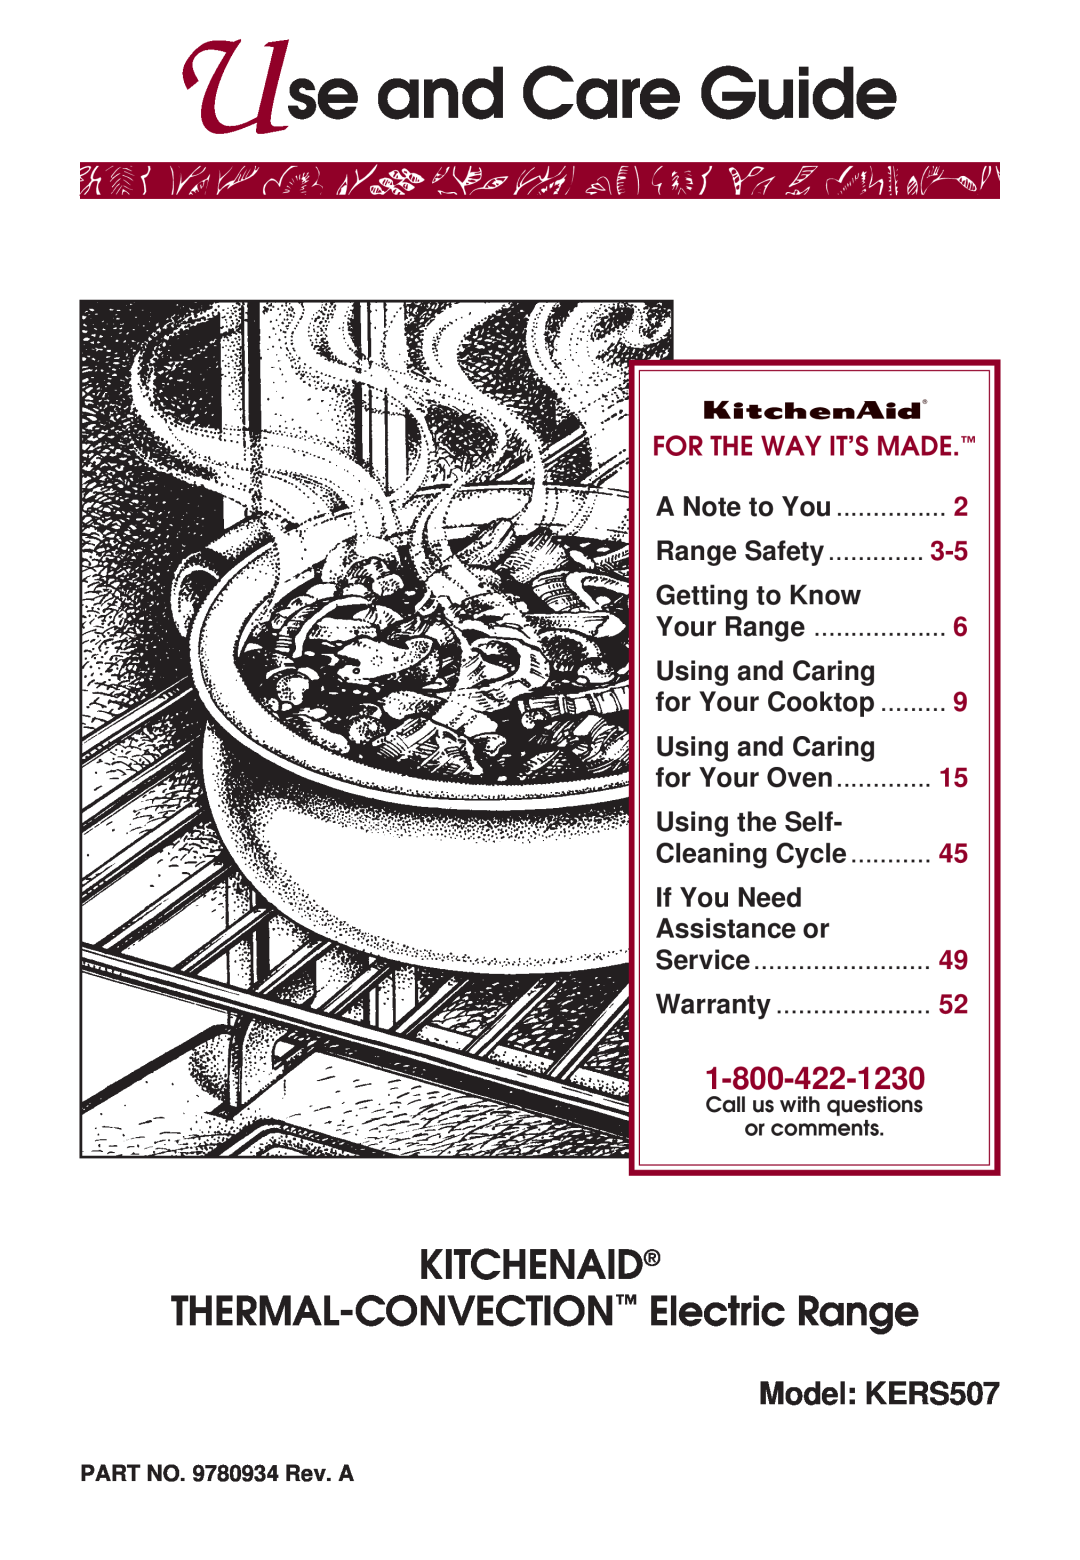 KitchenAid KERS507 warranty Use and Care Guide, KITCHENAID THERMAL-CONVECTION Electric Range, For The Way It’S Made 